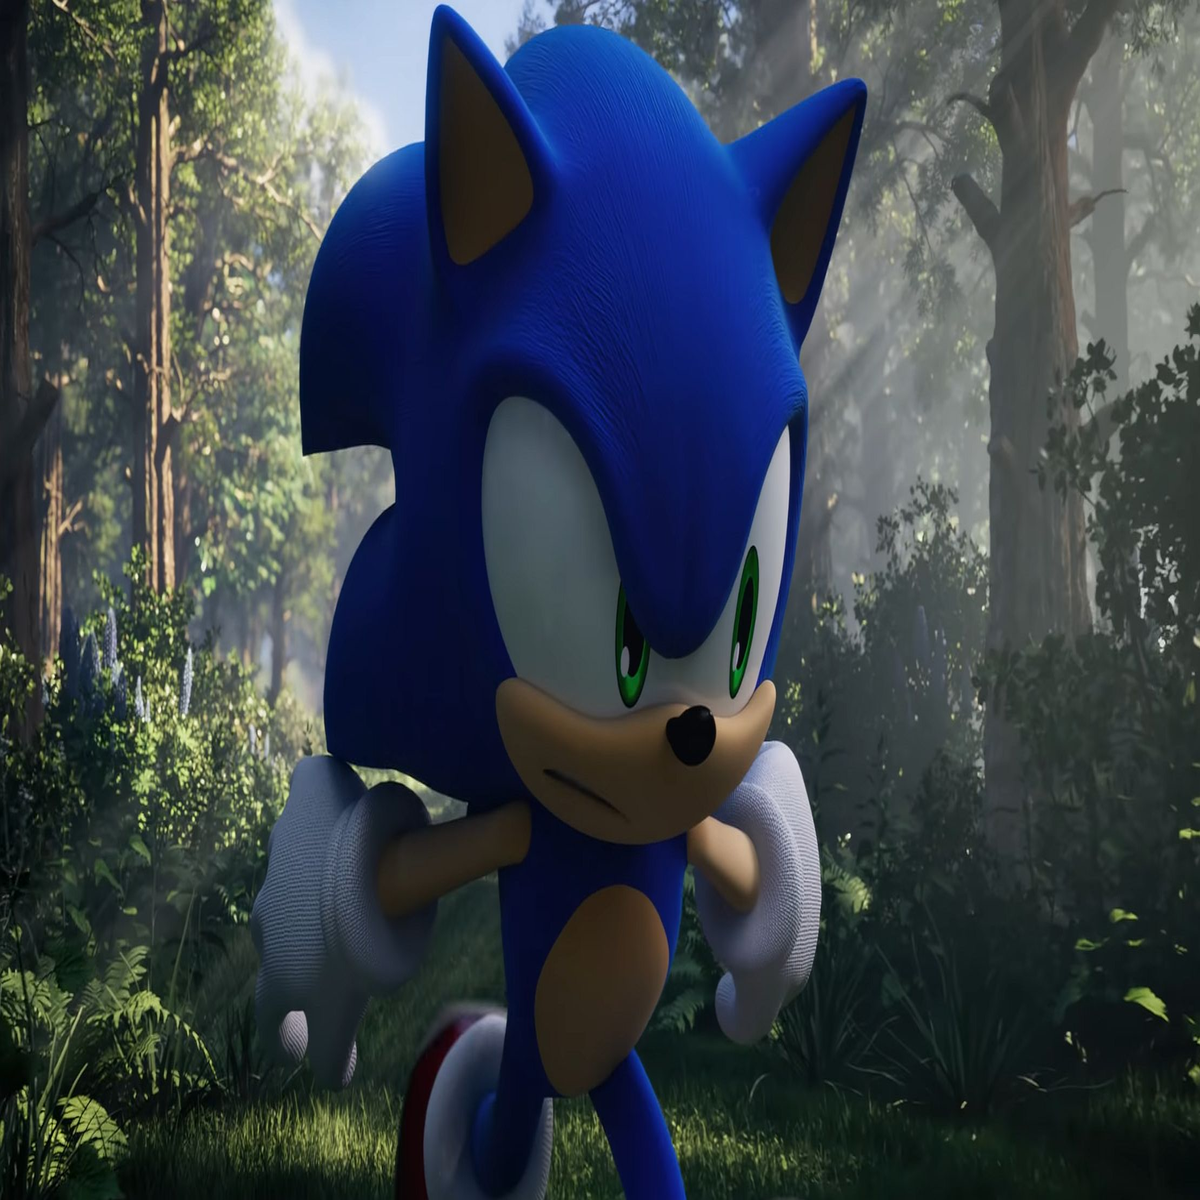 The Sights, Sounds, and Speed Update – Available March 22! - Sonic the  Hedgehog